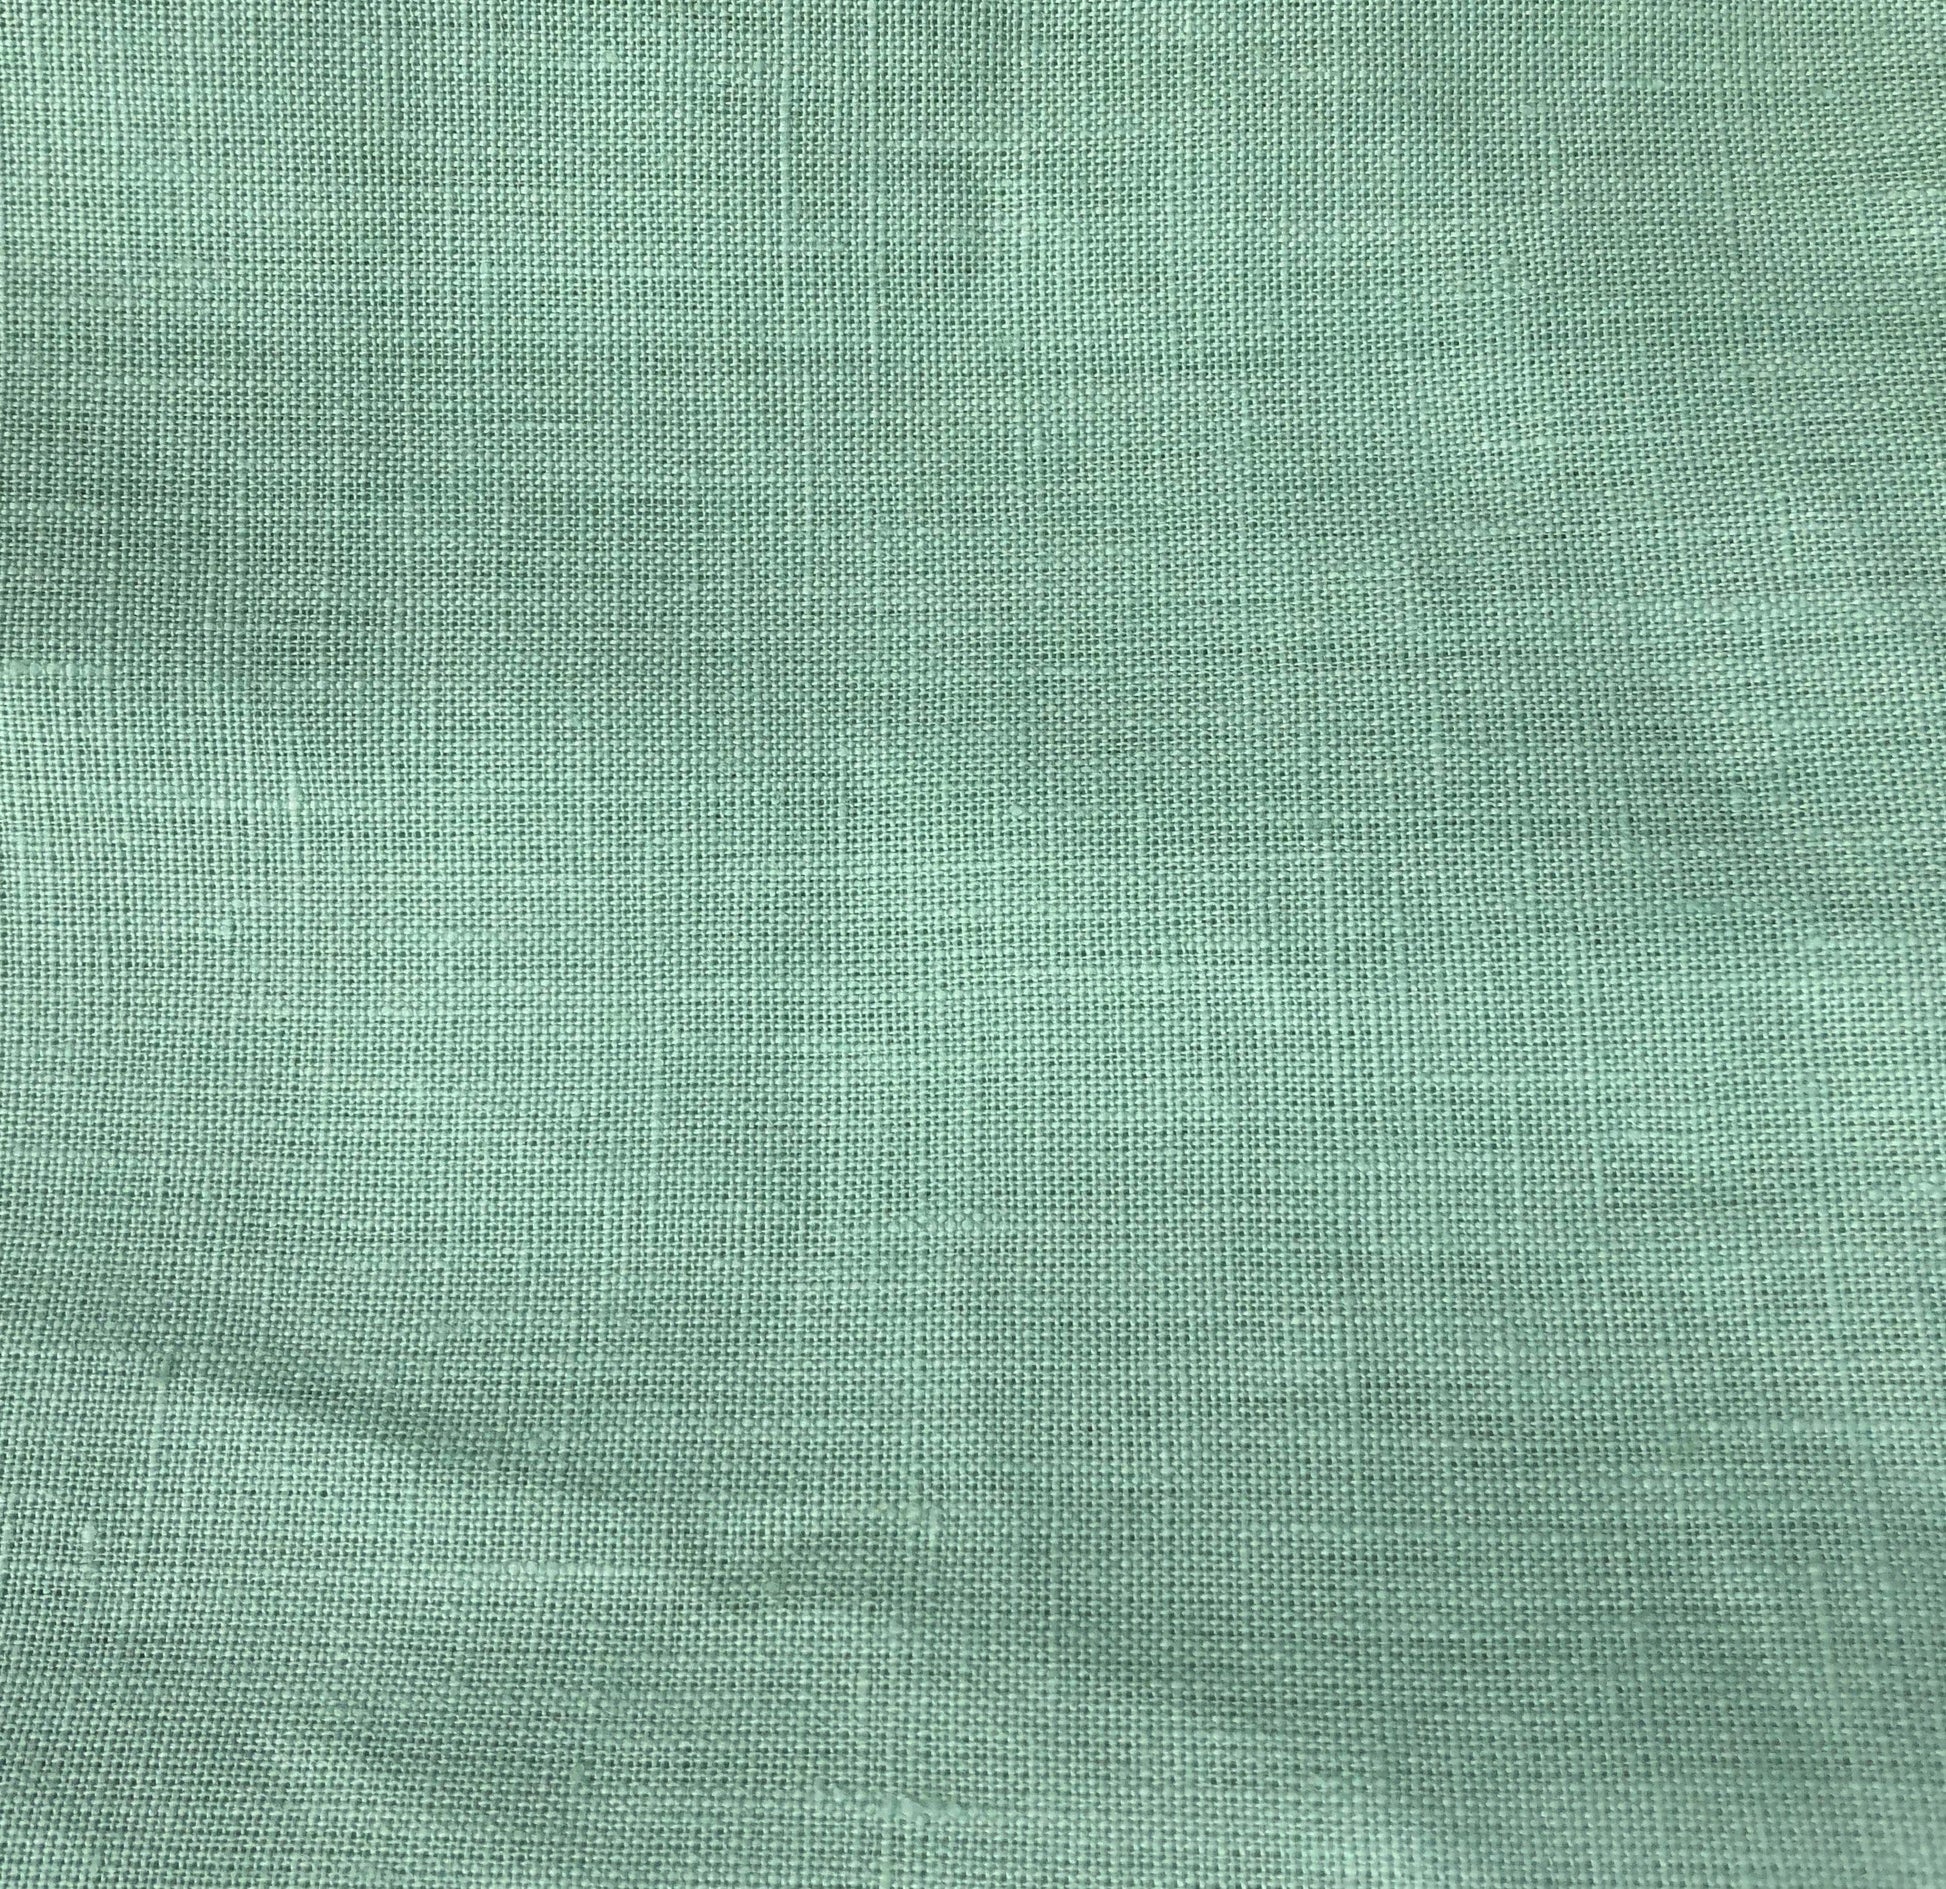 Natural Durable Hemp Shower Curtains, Washable Fabric Curtains Hemp Shower Curtain Seafoam - SHOO-FOO, the softness of bamboo